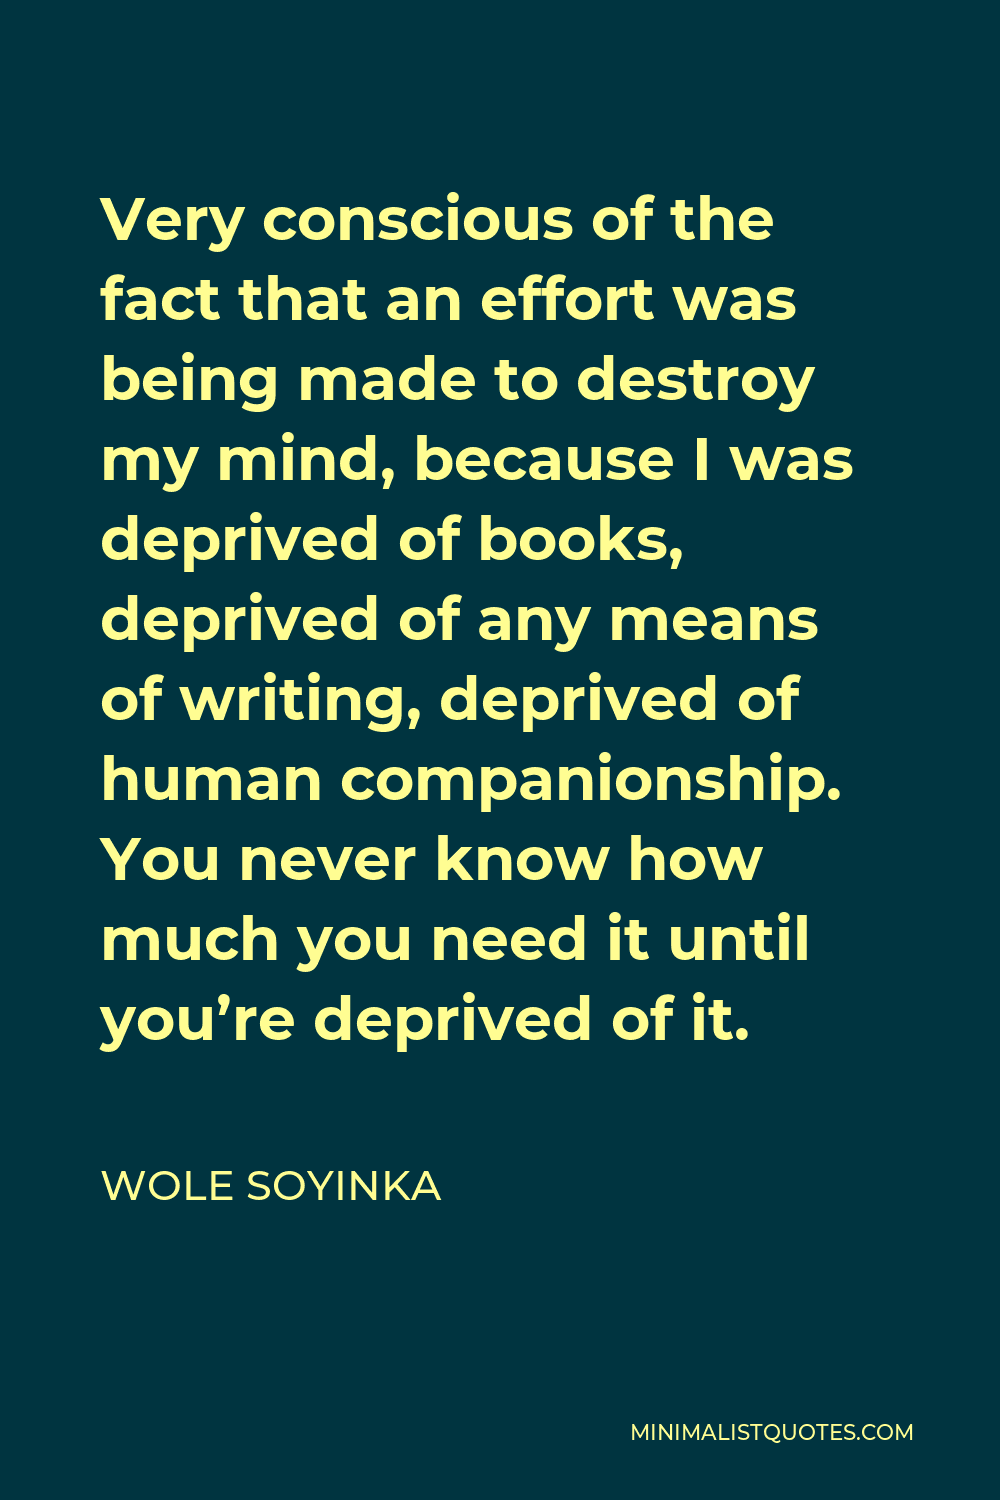 Wole Soyinka Quote - Very conscious of the fact that an effort was being made to destroy my mind, because I was deprived of books, deprived of any means of writing, deprived of human companionship. You never know how much you need it until you’re deprived of it.